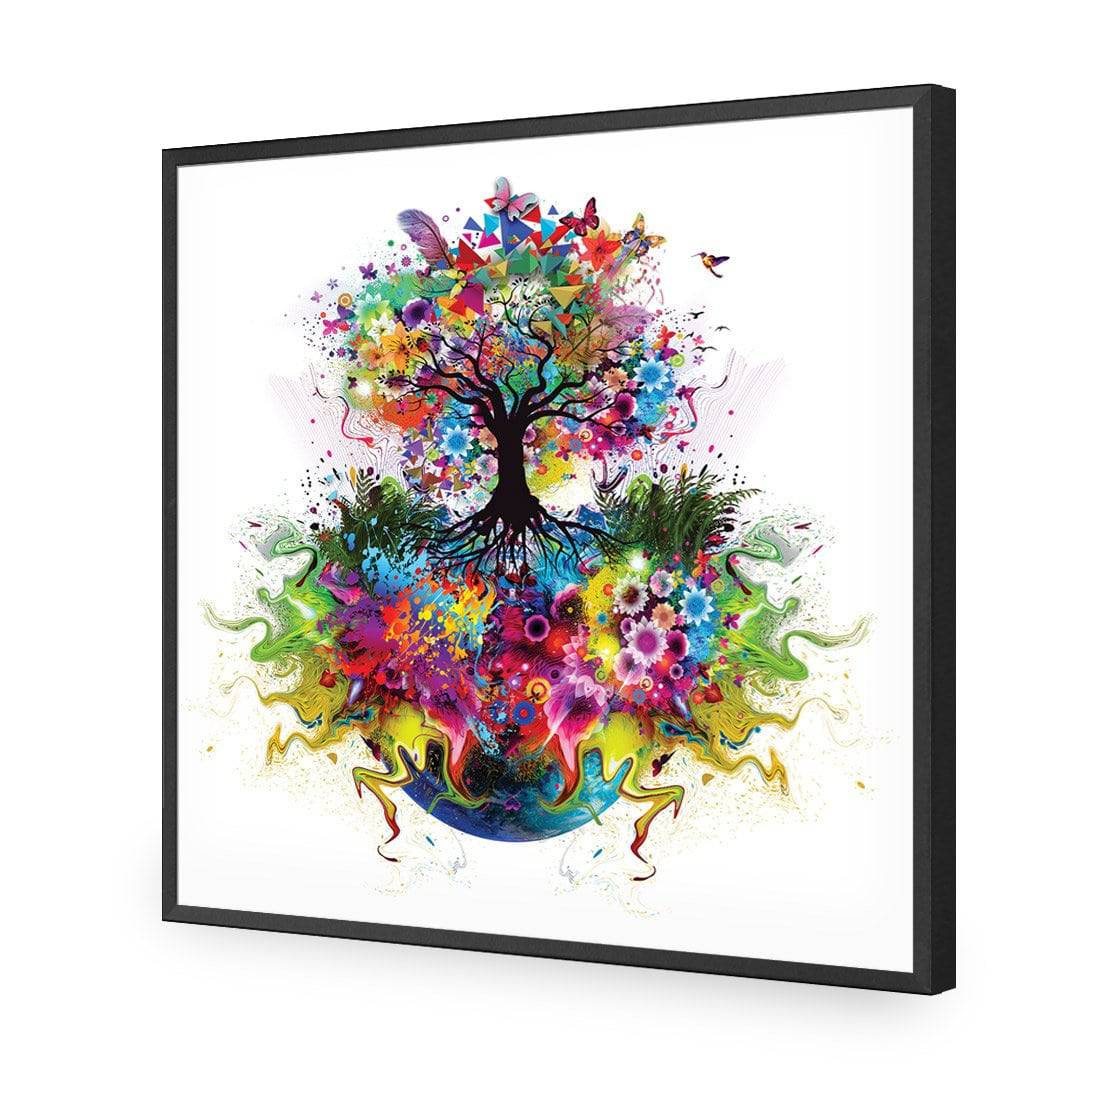 Flower Power, Square-Acrylic-Wall Art Design-Without Border-Acrylic - Black Frame-37x37cm-Wall Art Designs